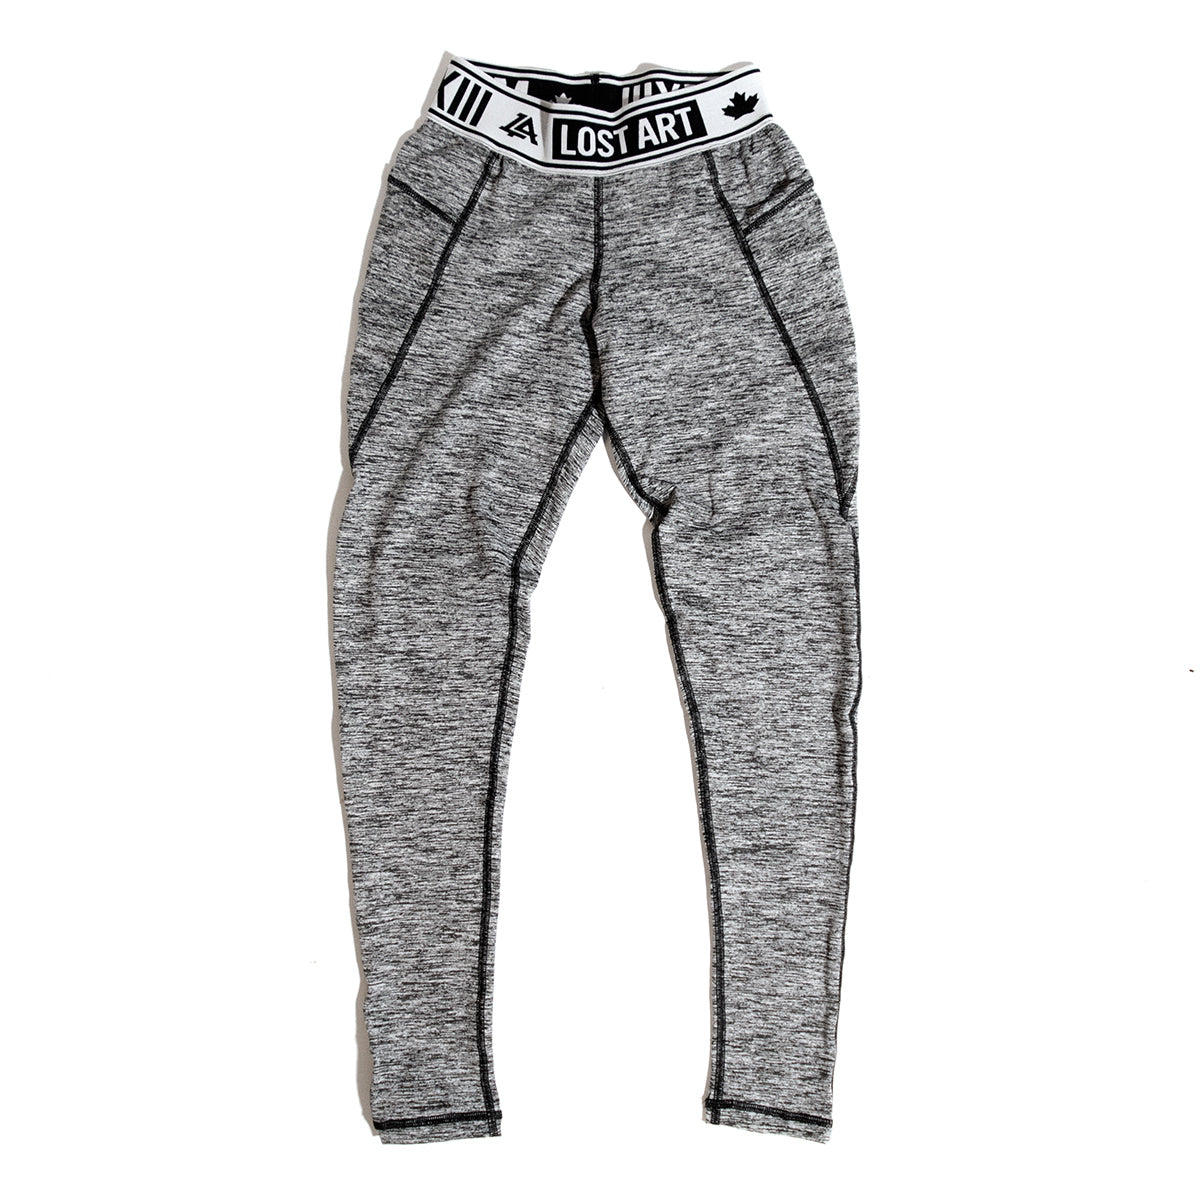 Lost Art Canada - heathered grey and black leggings front view